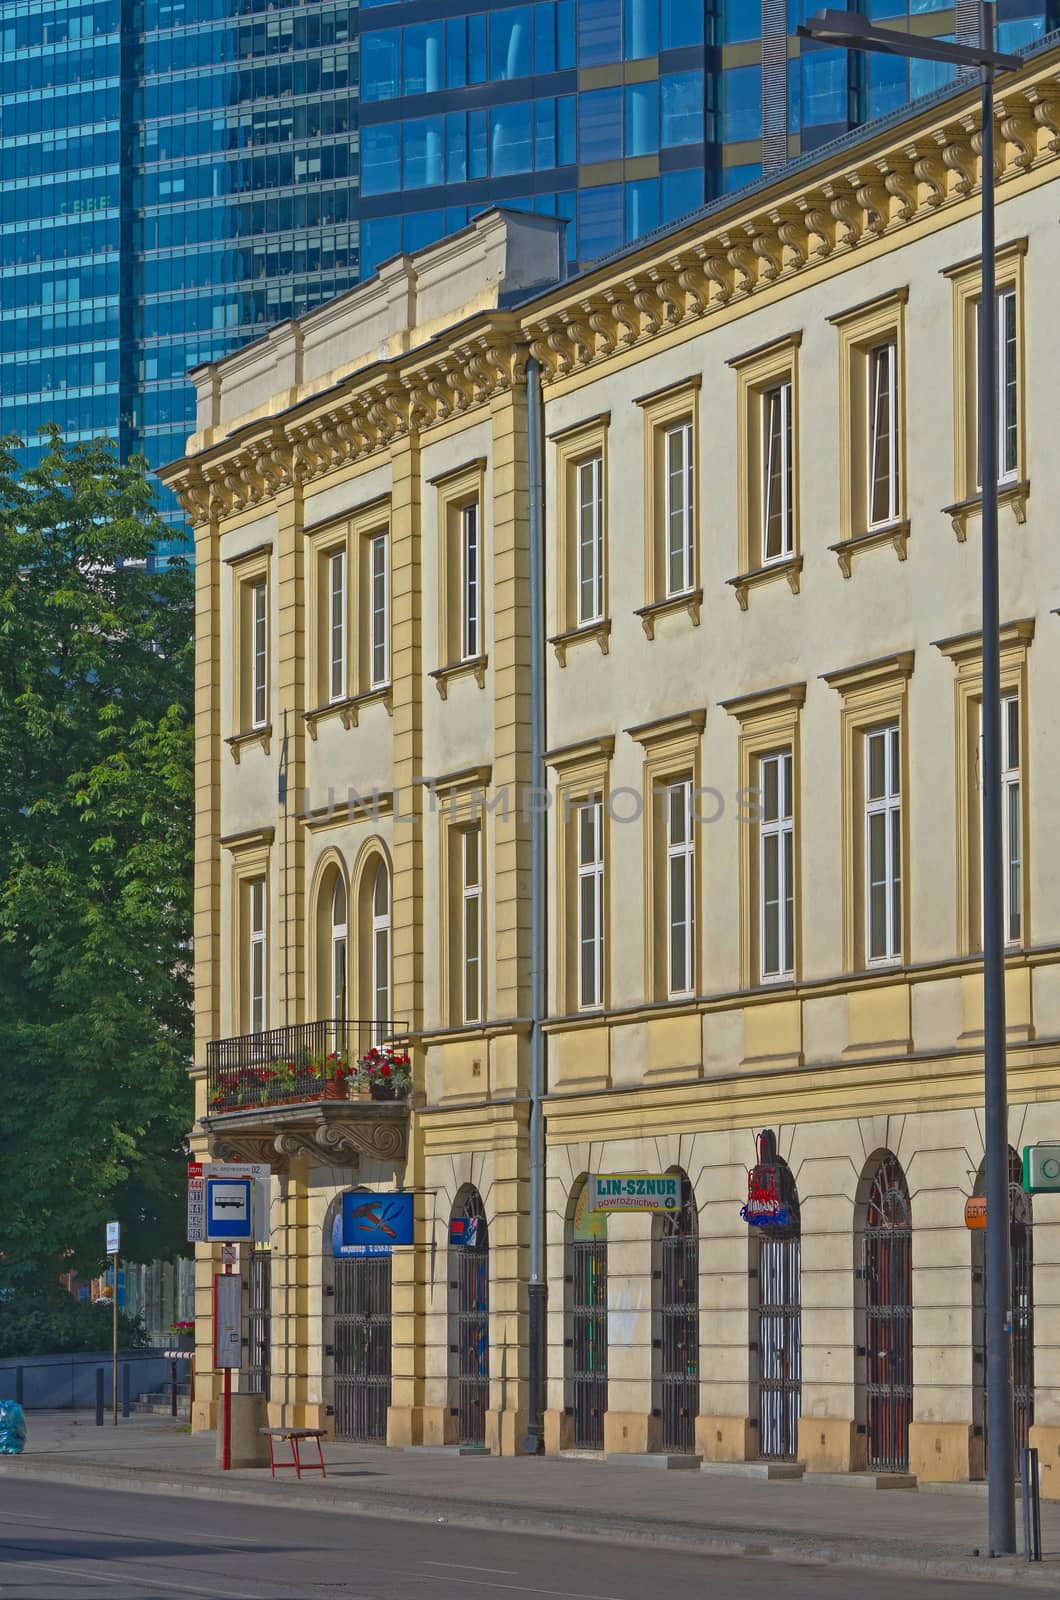 Different types of office and residential buildings, Warsaw, Poland.